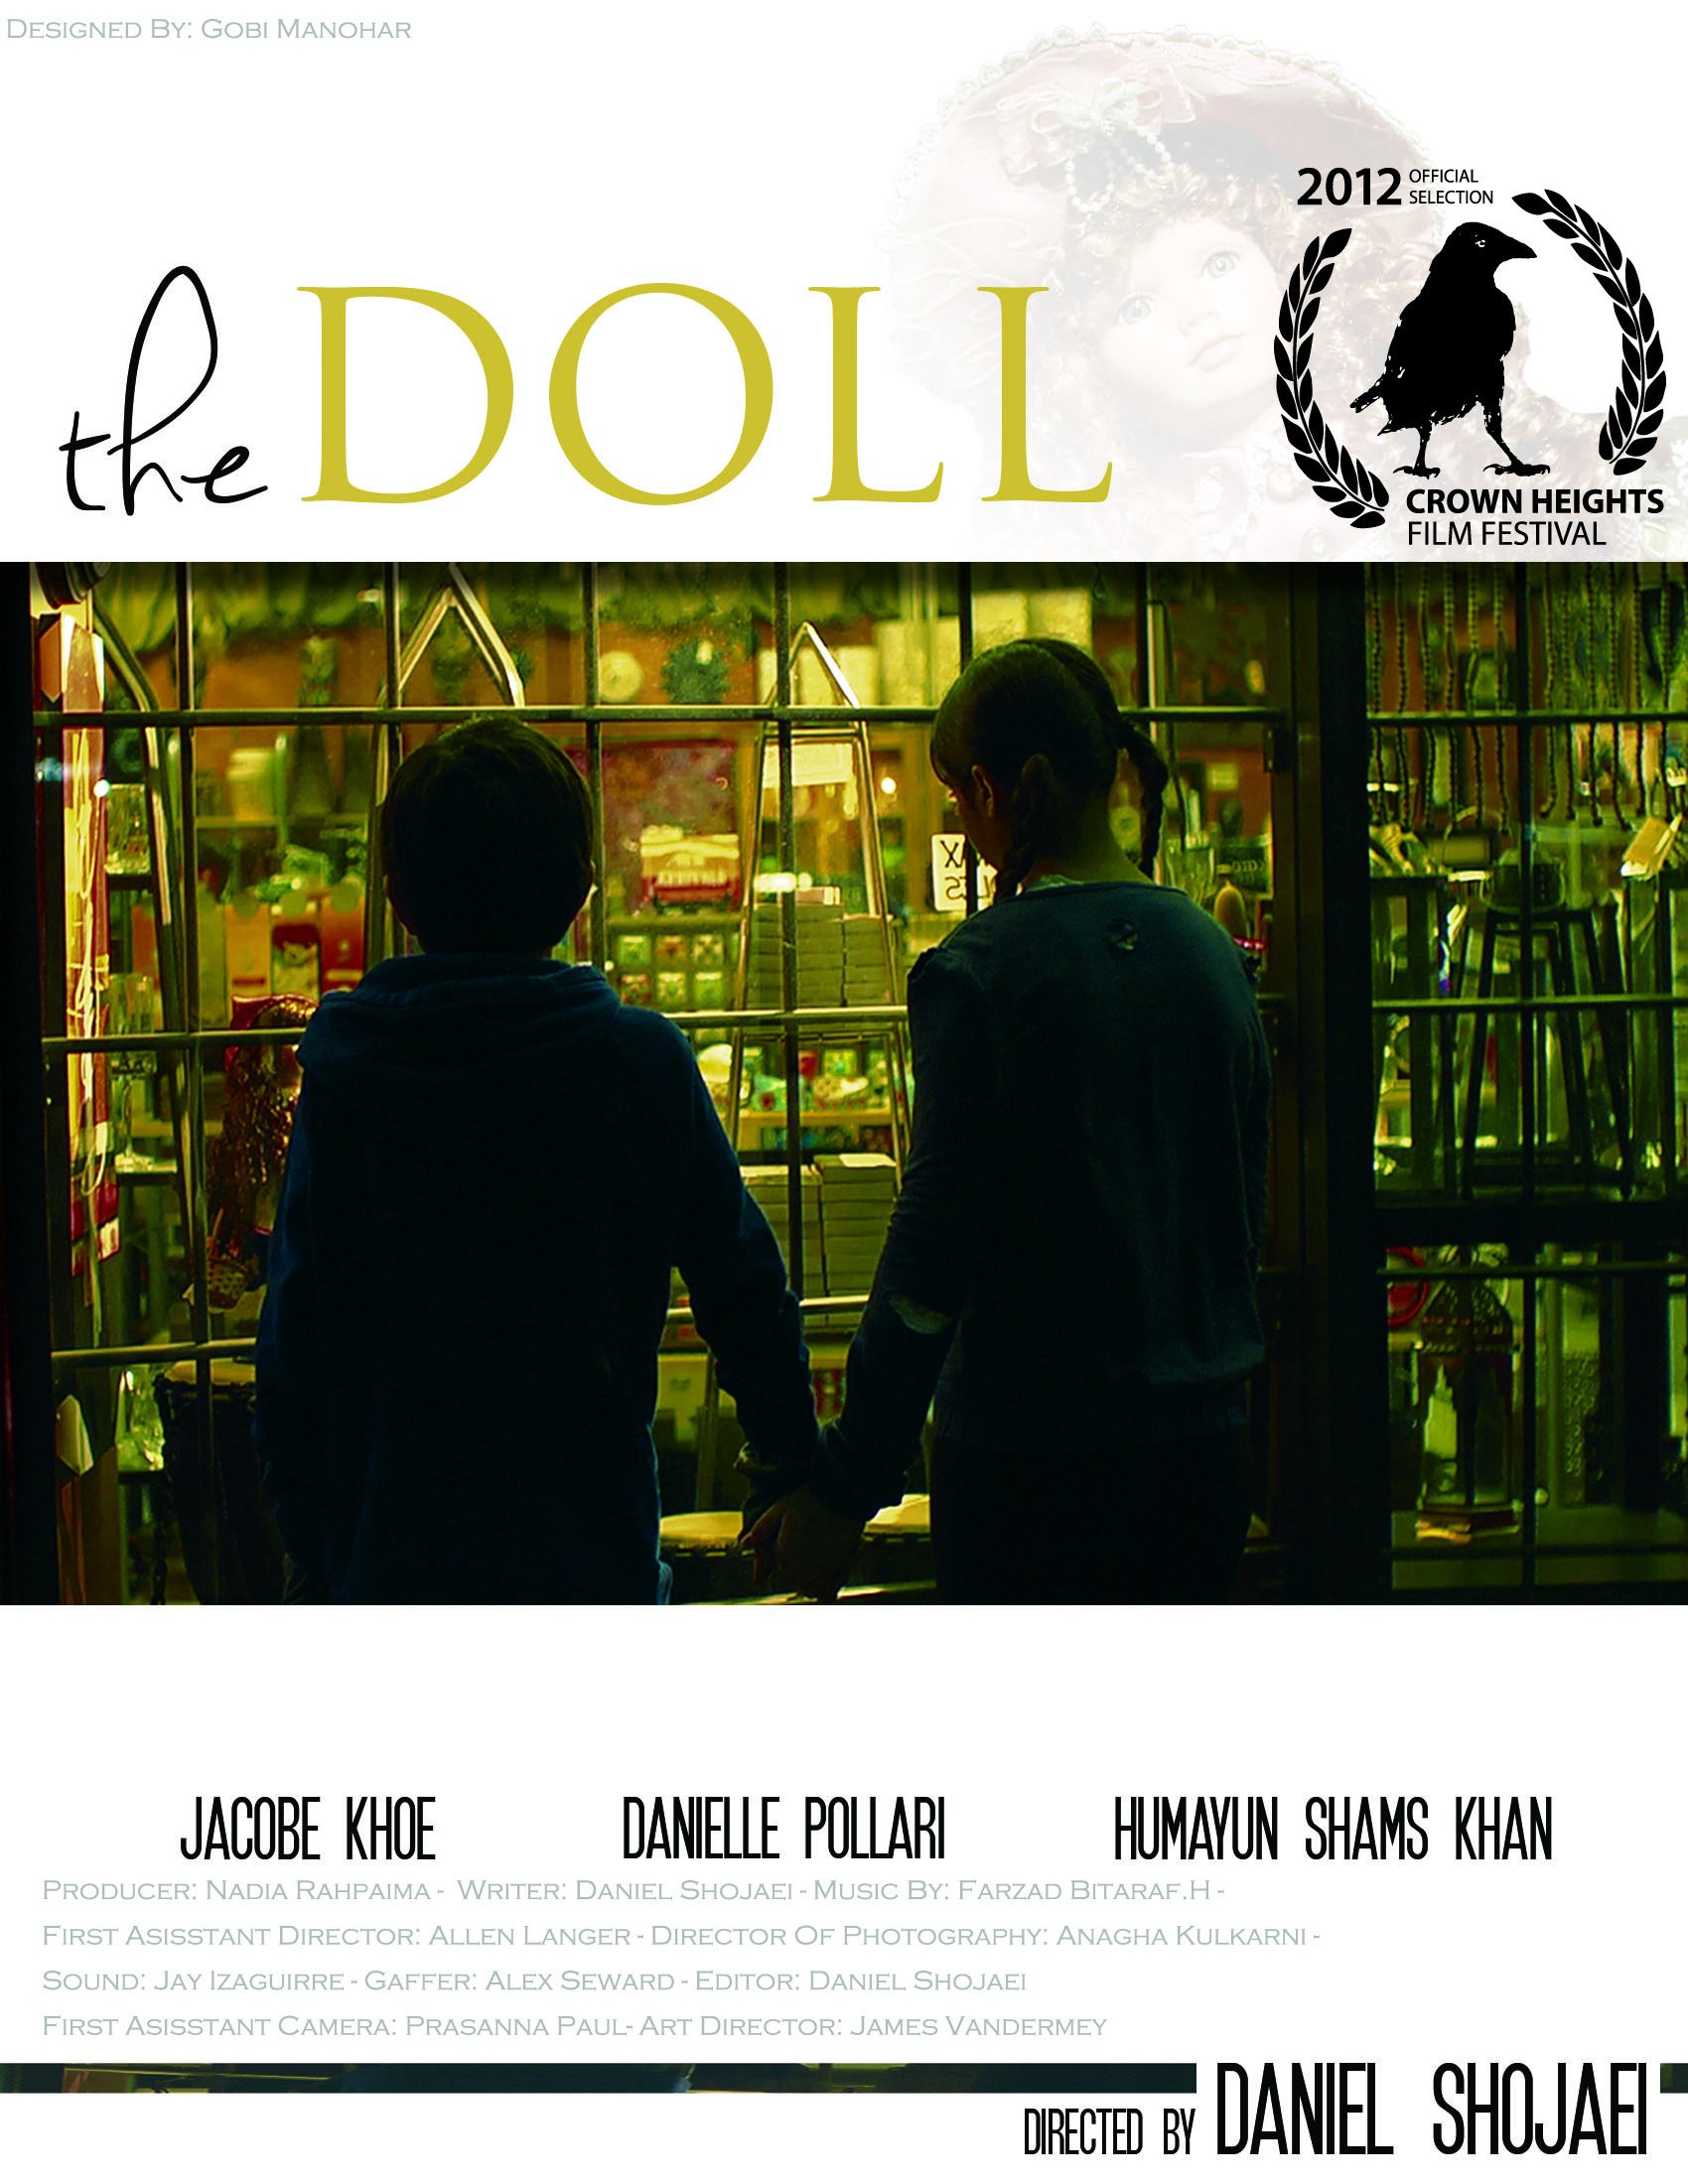 Mega Sized Movie Poster Image for The Doll